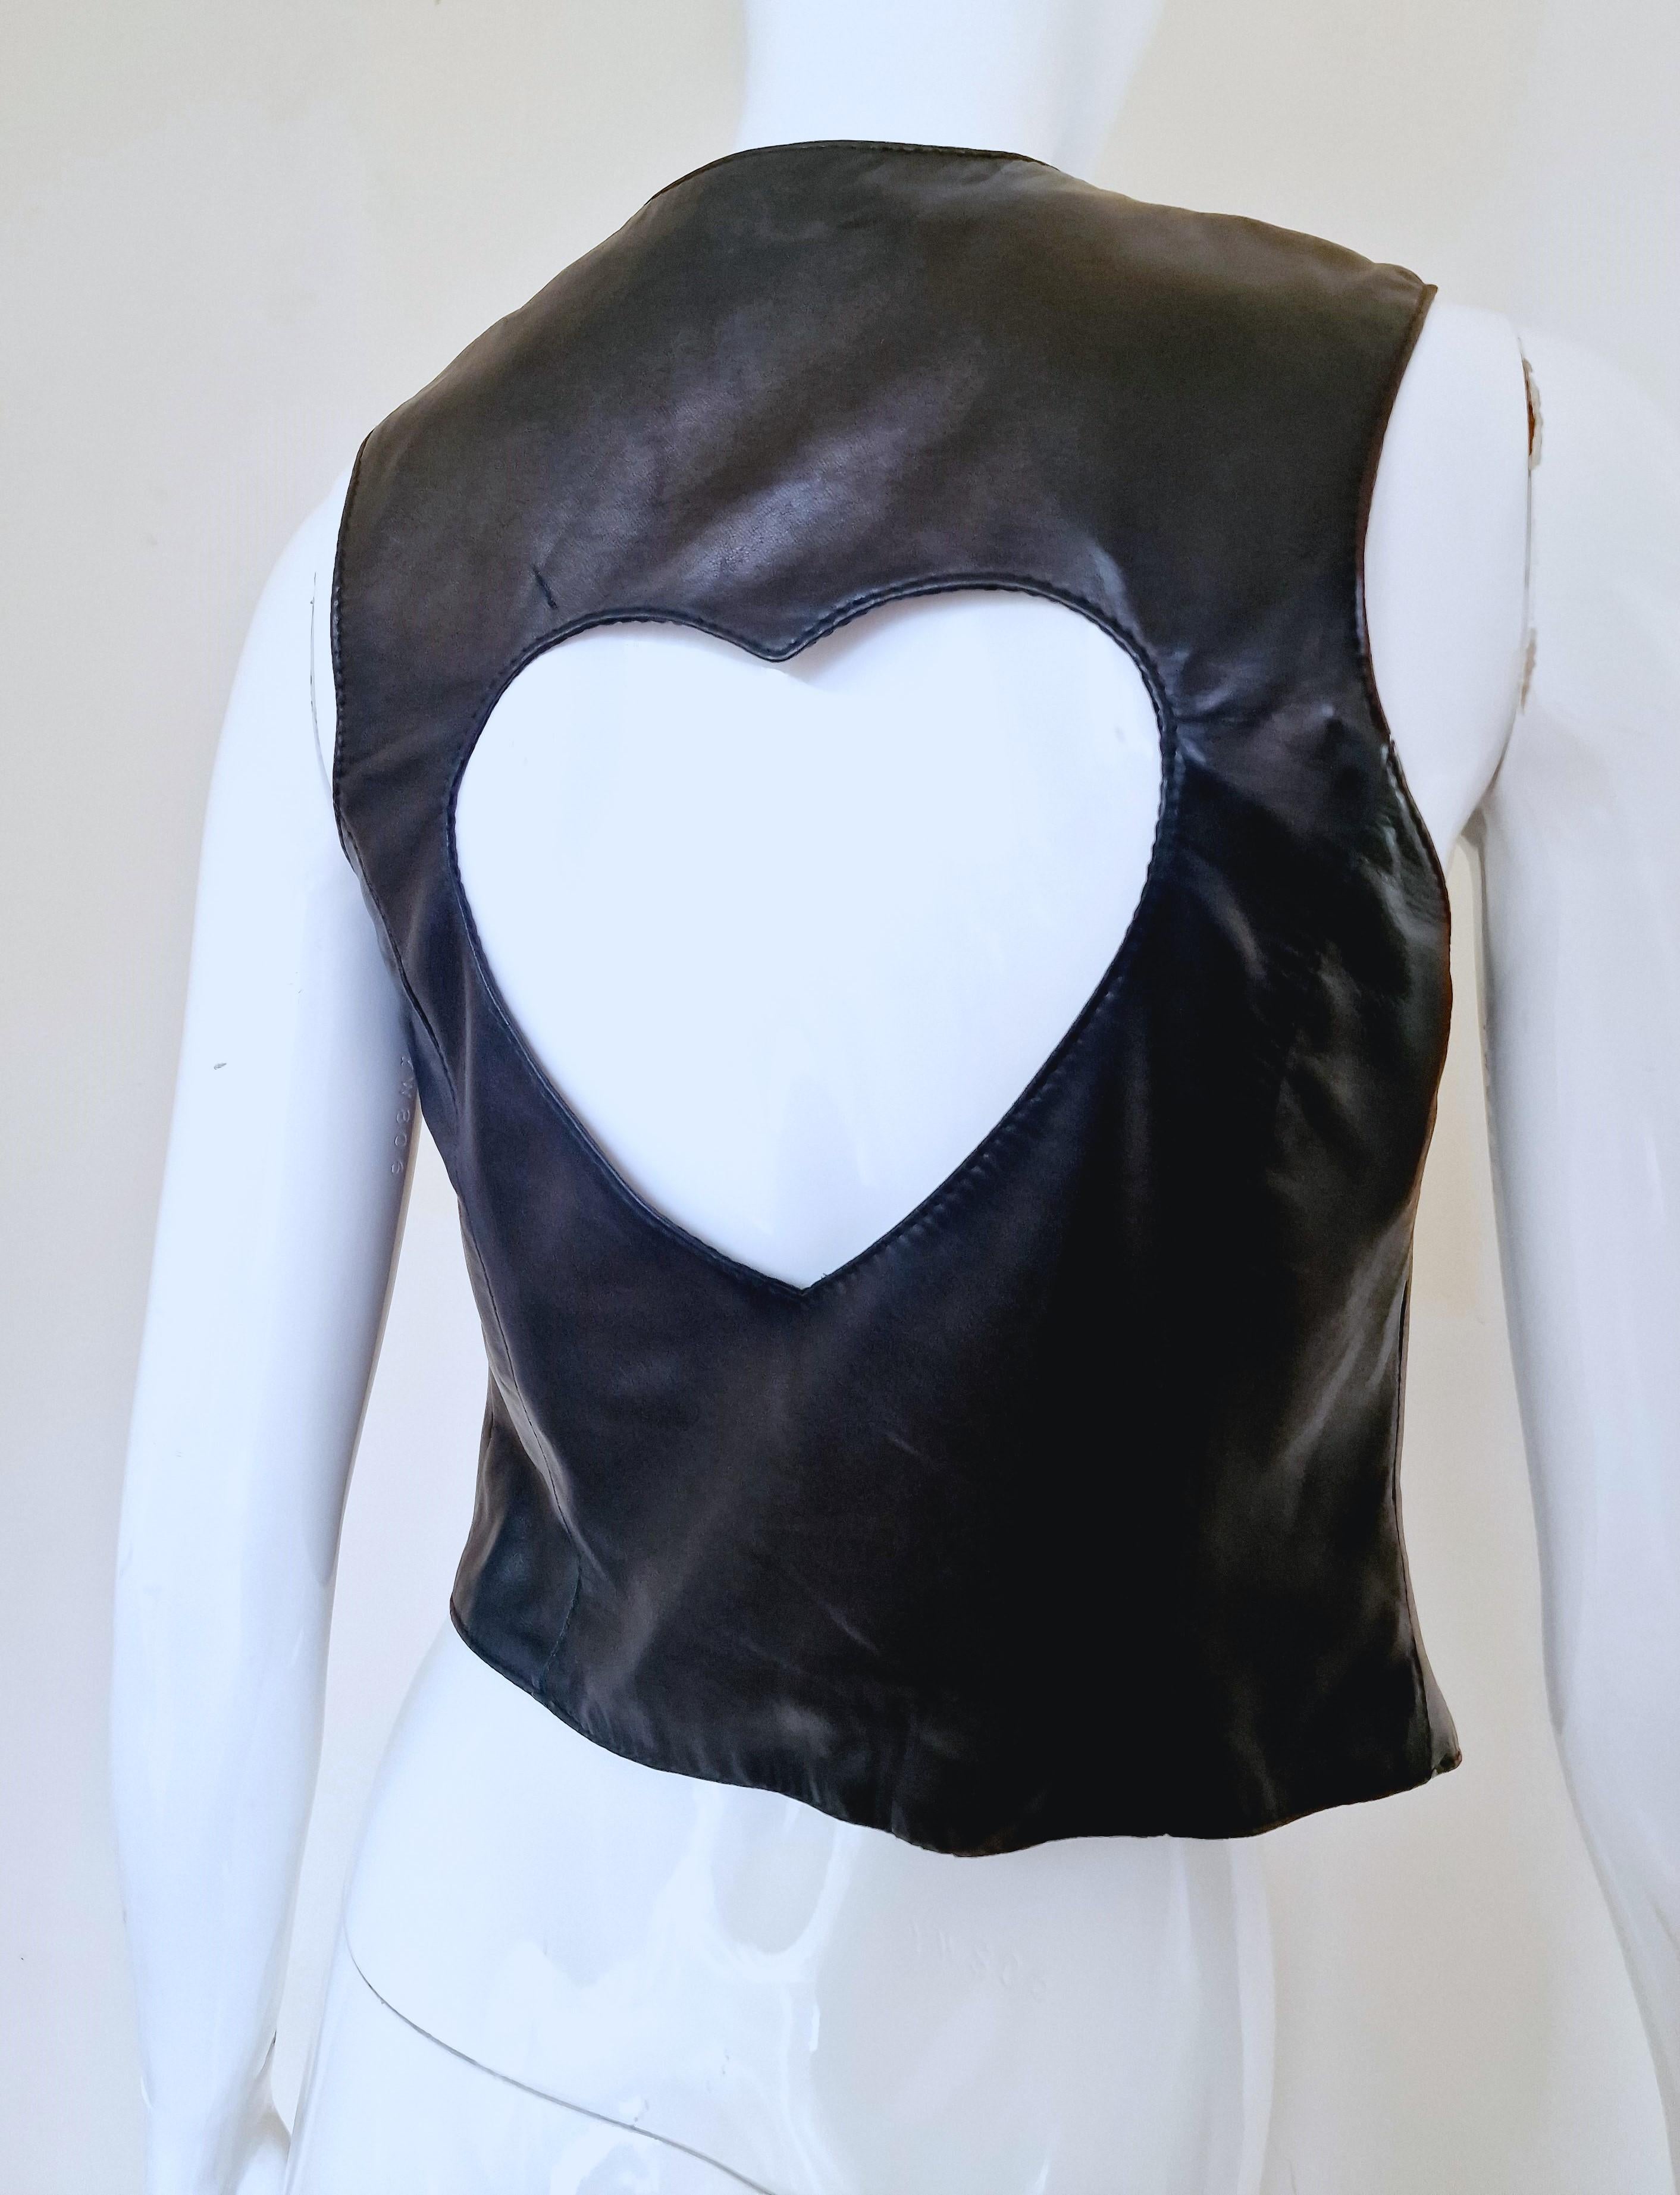 Moschino Leather Heart Cut out Cut-out Bella Hadid Top Jacket Black Medium Vest For Sale 7